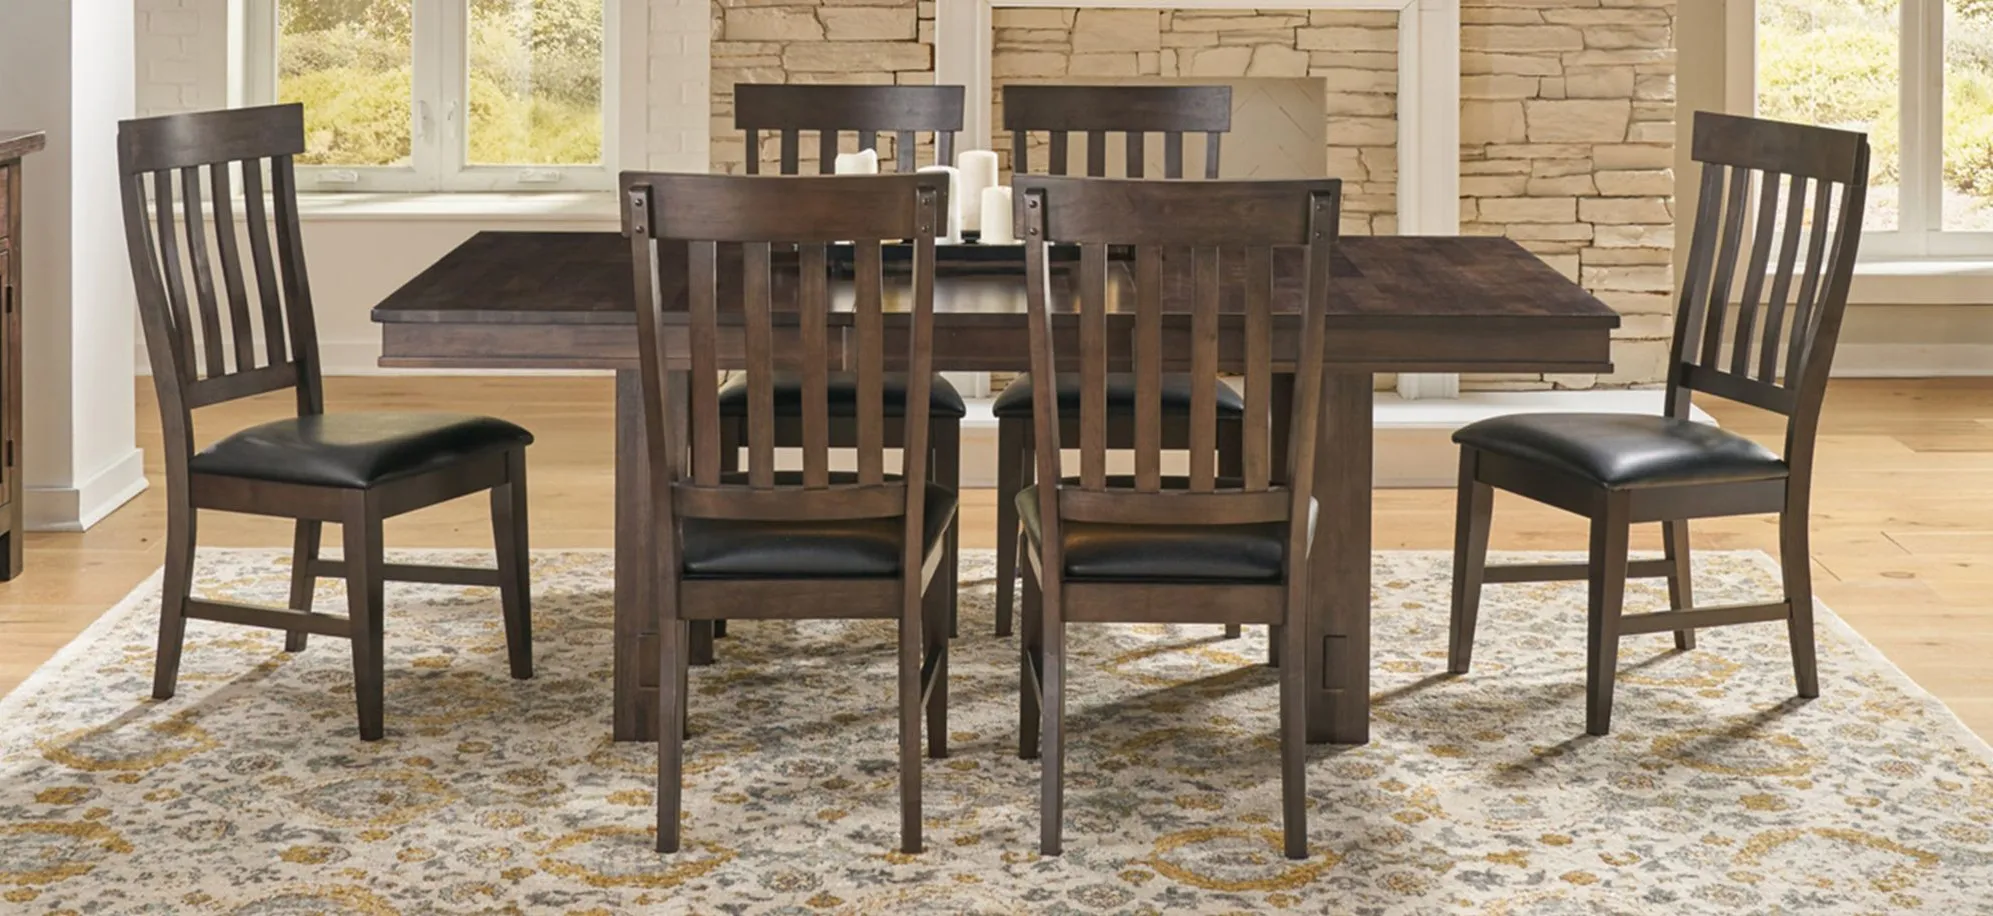 Bremerton 7-pc. Rectangular Dining Set with Butterfly Leaf in Warm Gray by A-America